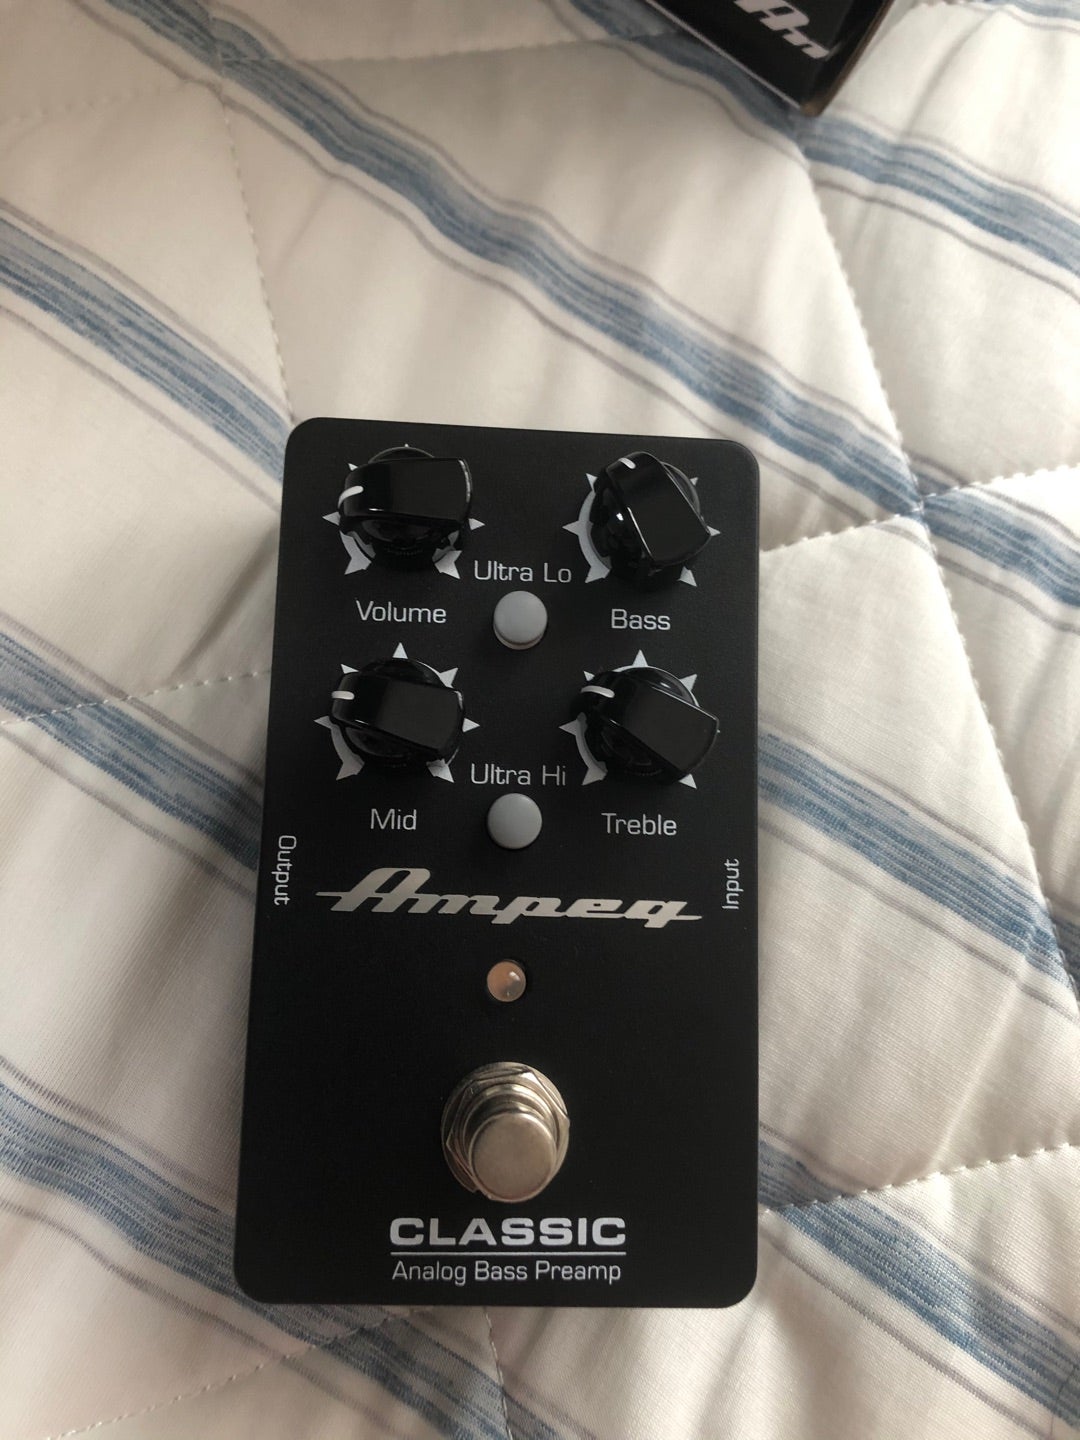 Ampeg Classic Analog Bass preamp、軽くレビュー。と思いきや 